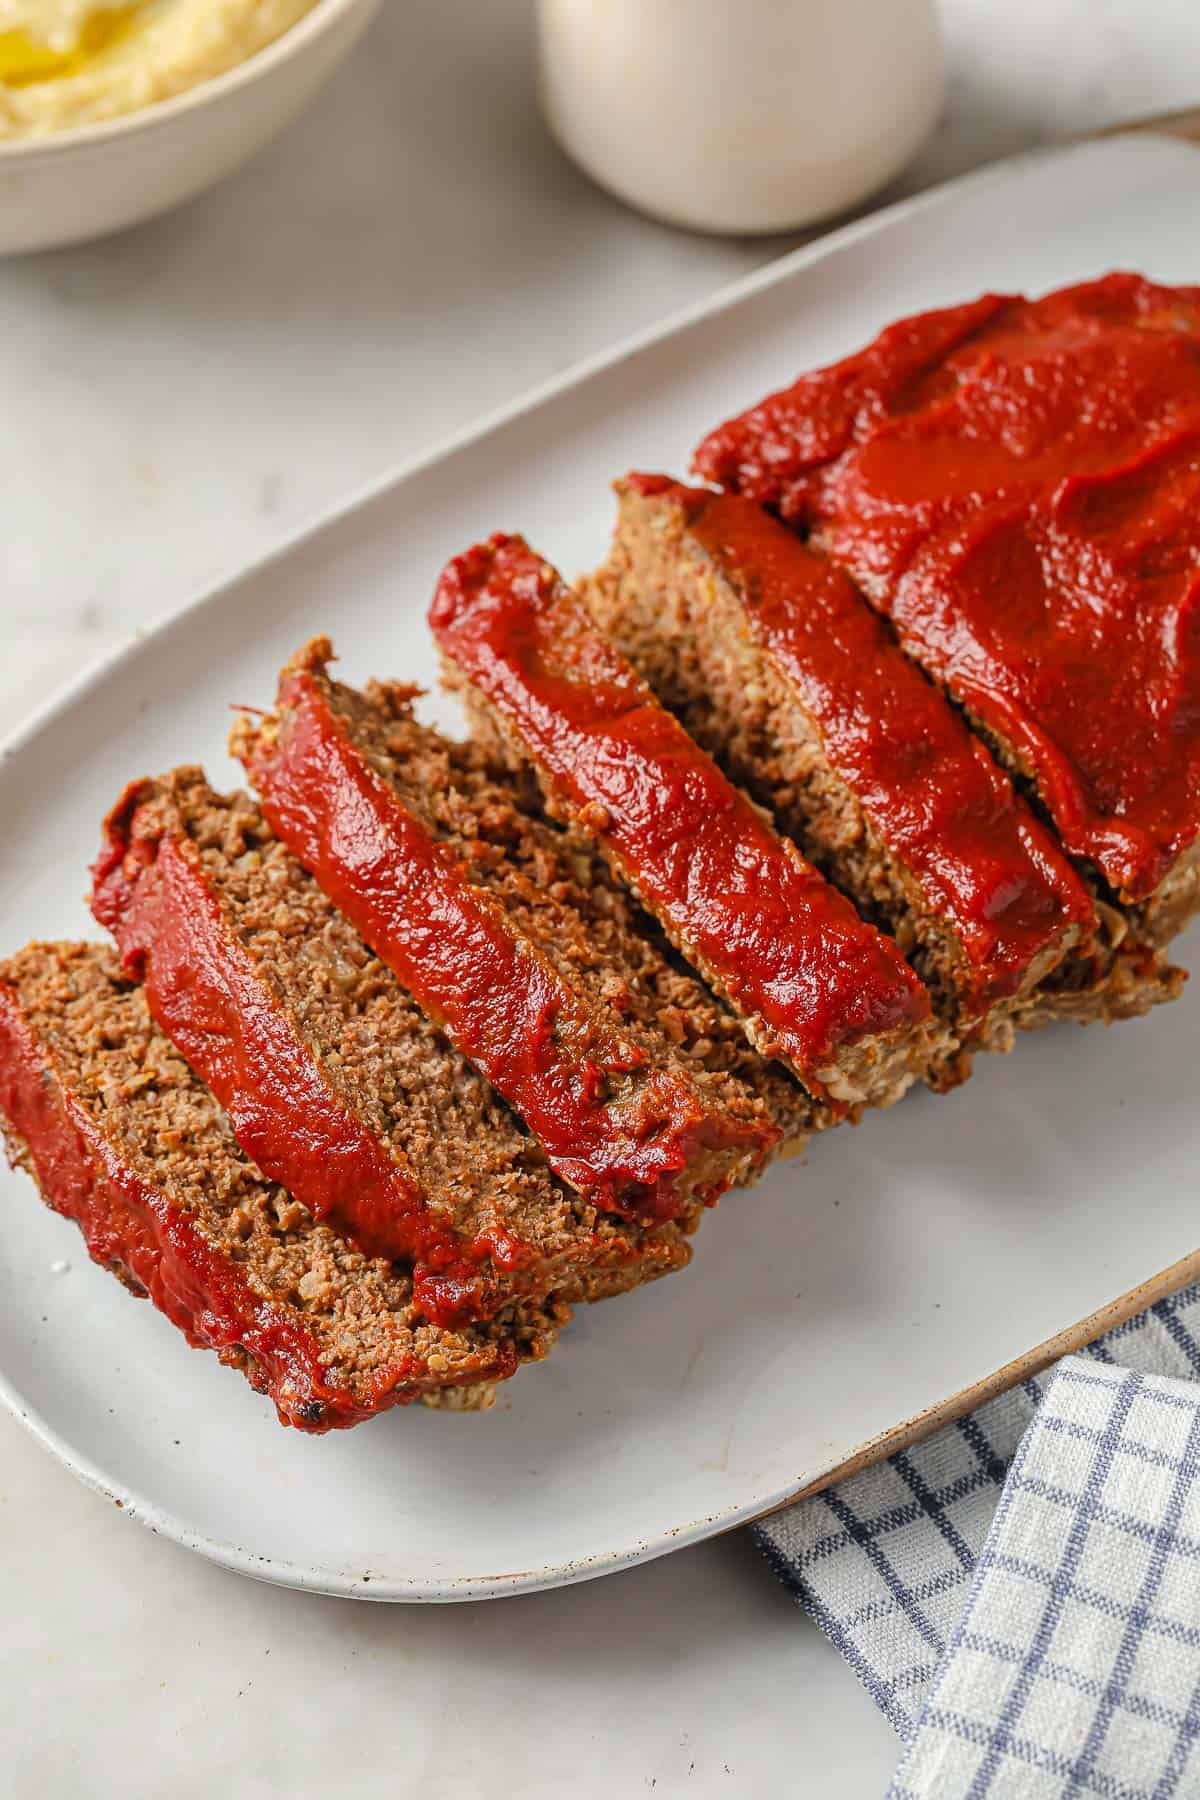 meatloaf topped with ketchup, sliced and served on a white serving platter - gravy and mashed cauliflower in the background